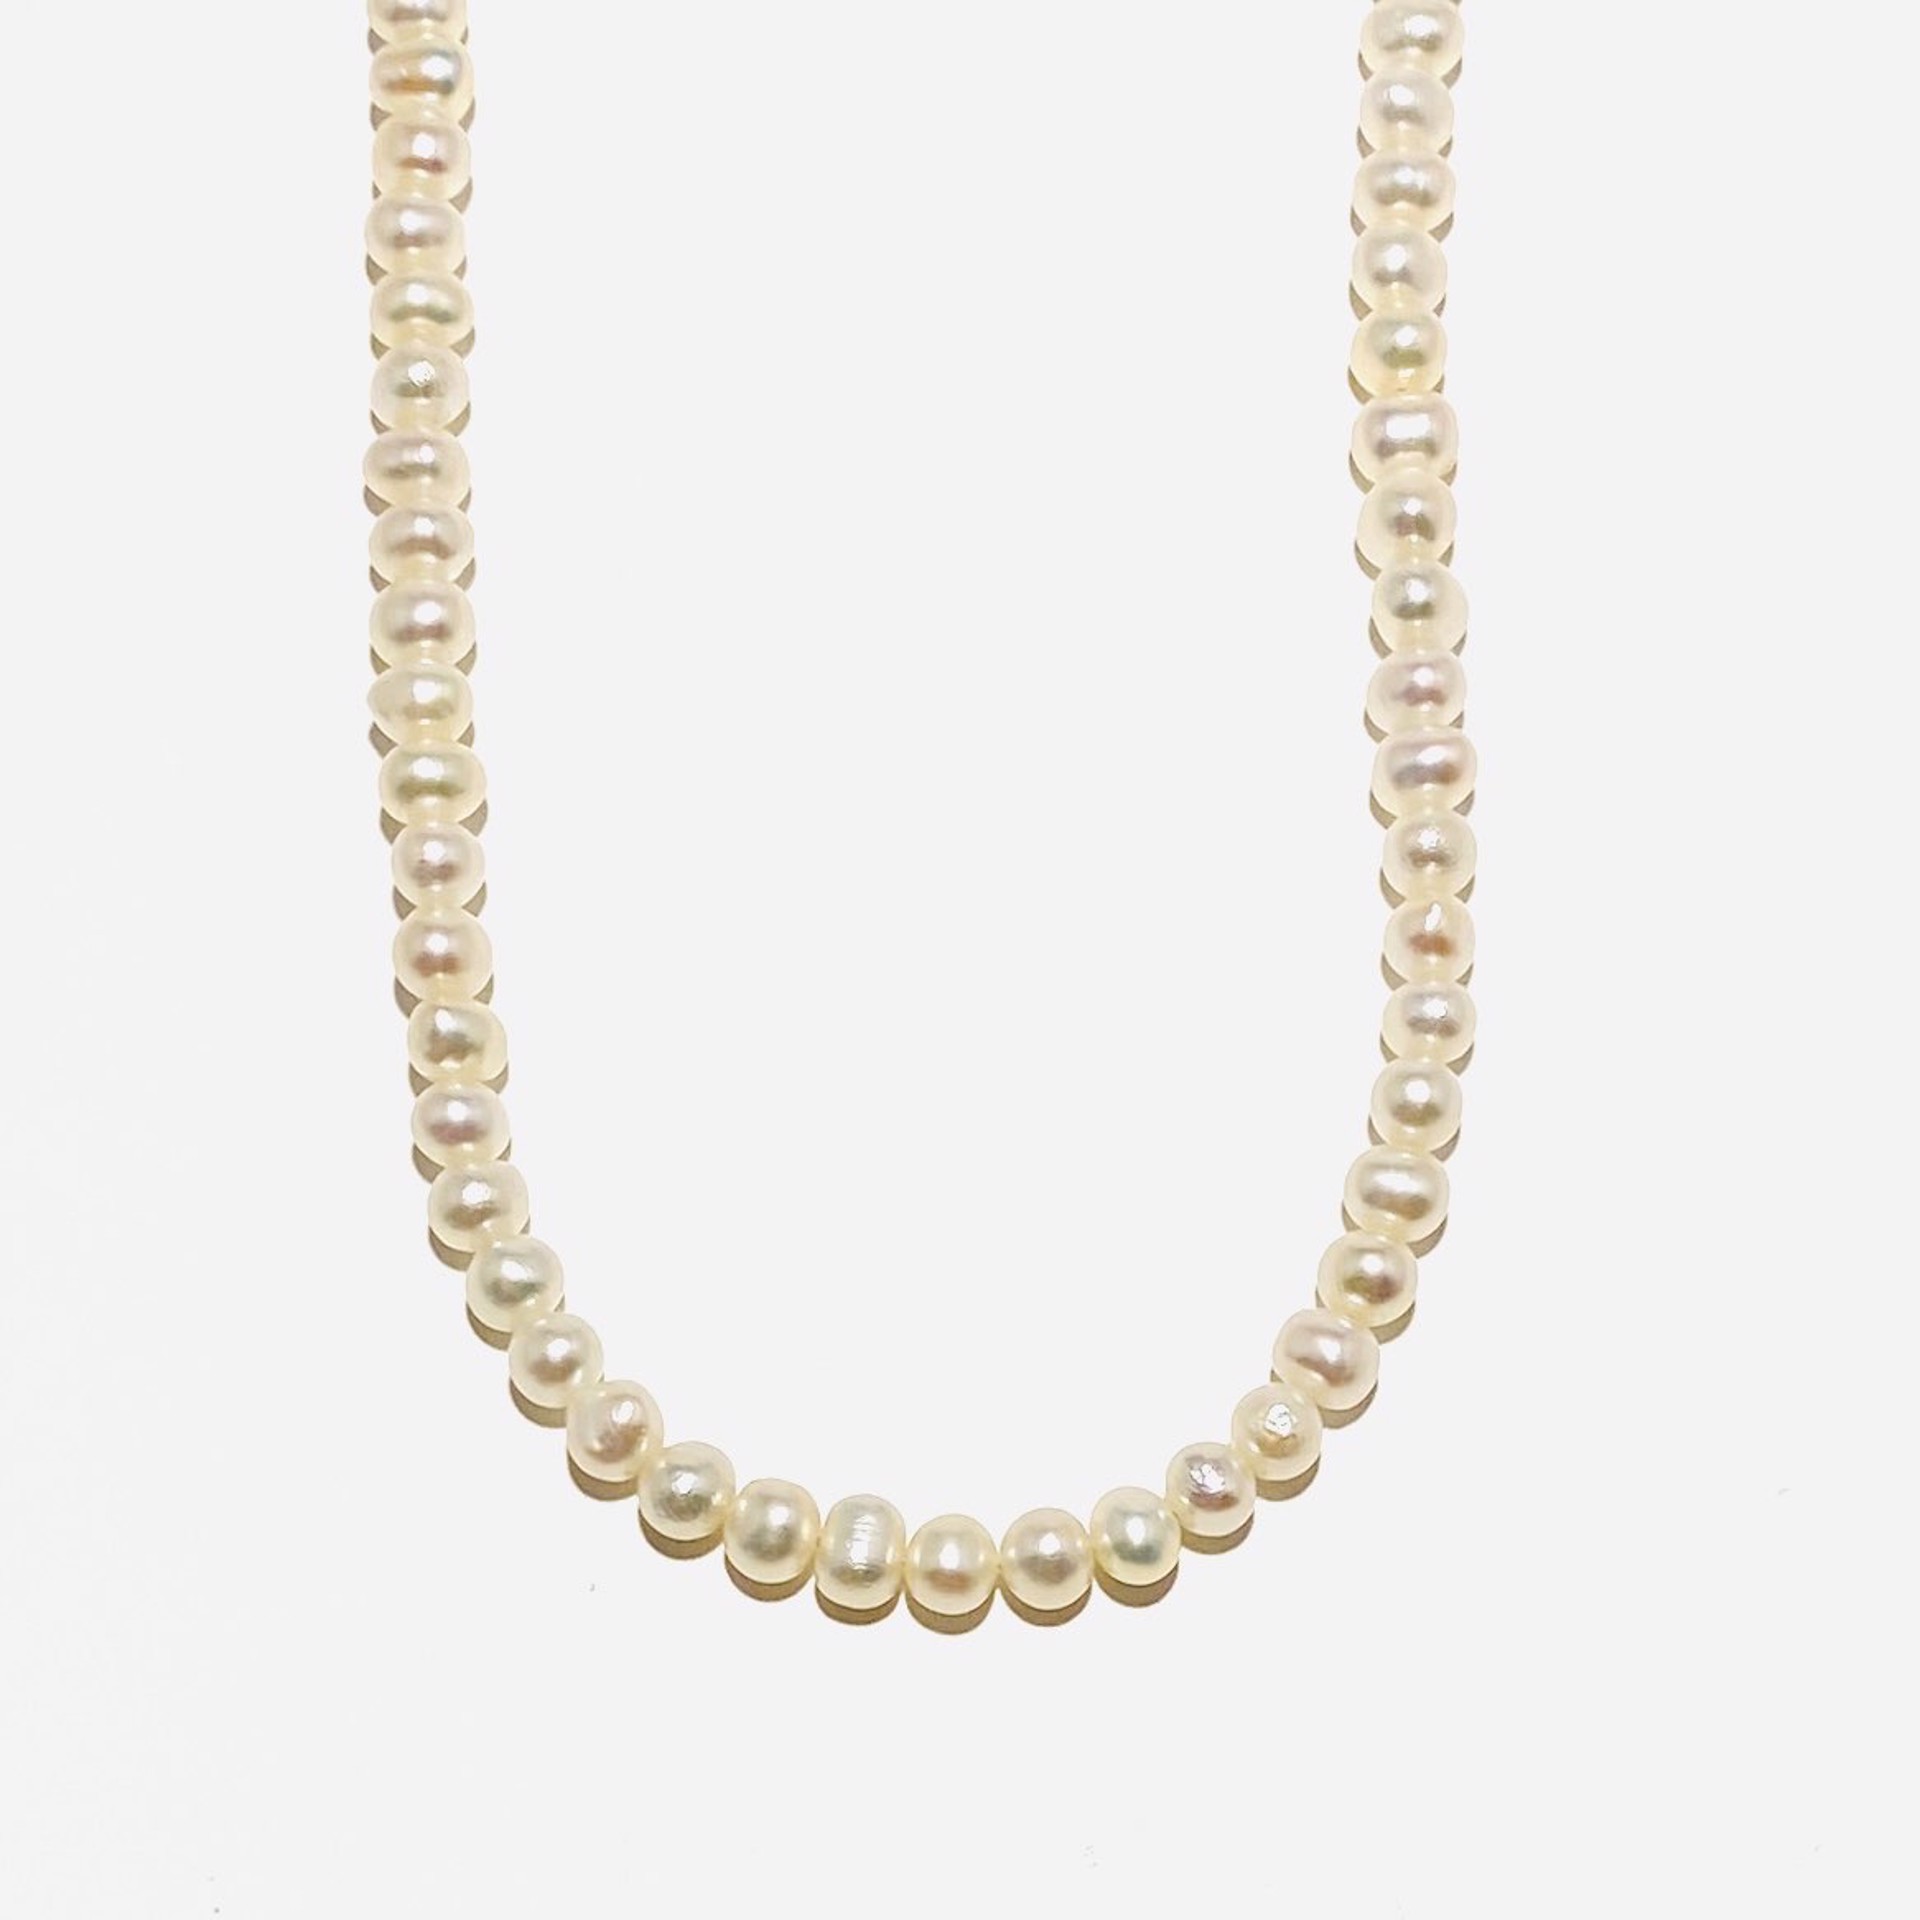 White Pearl Strand Necklace by Nance Trueworthy